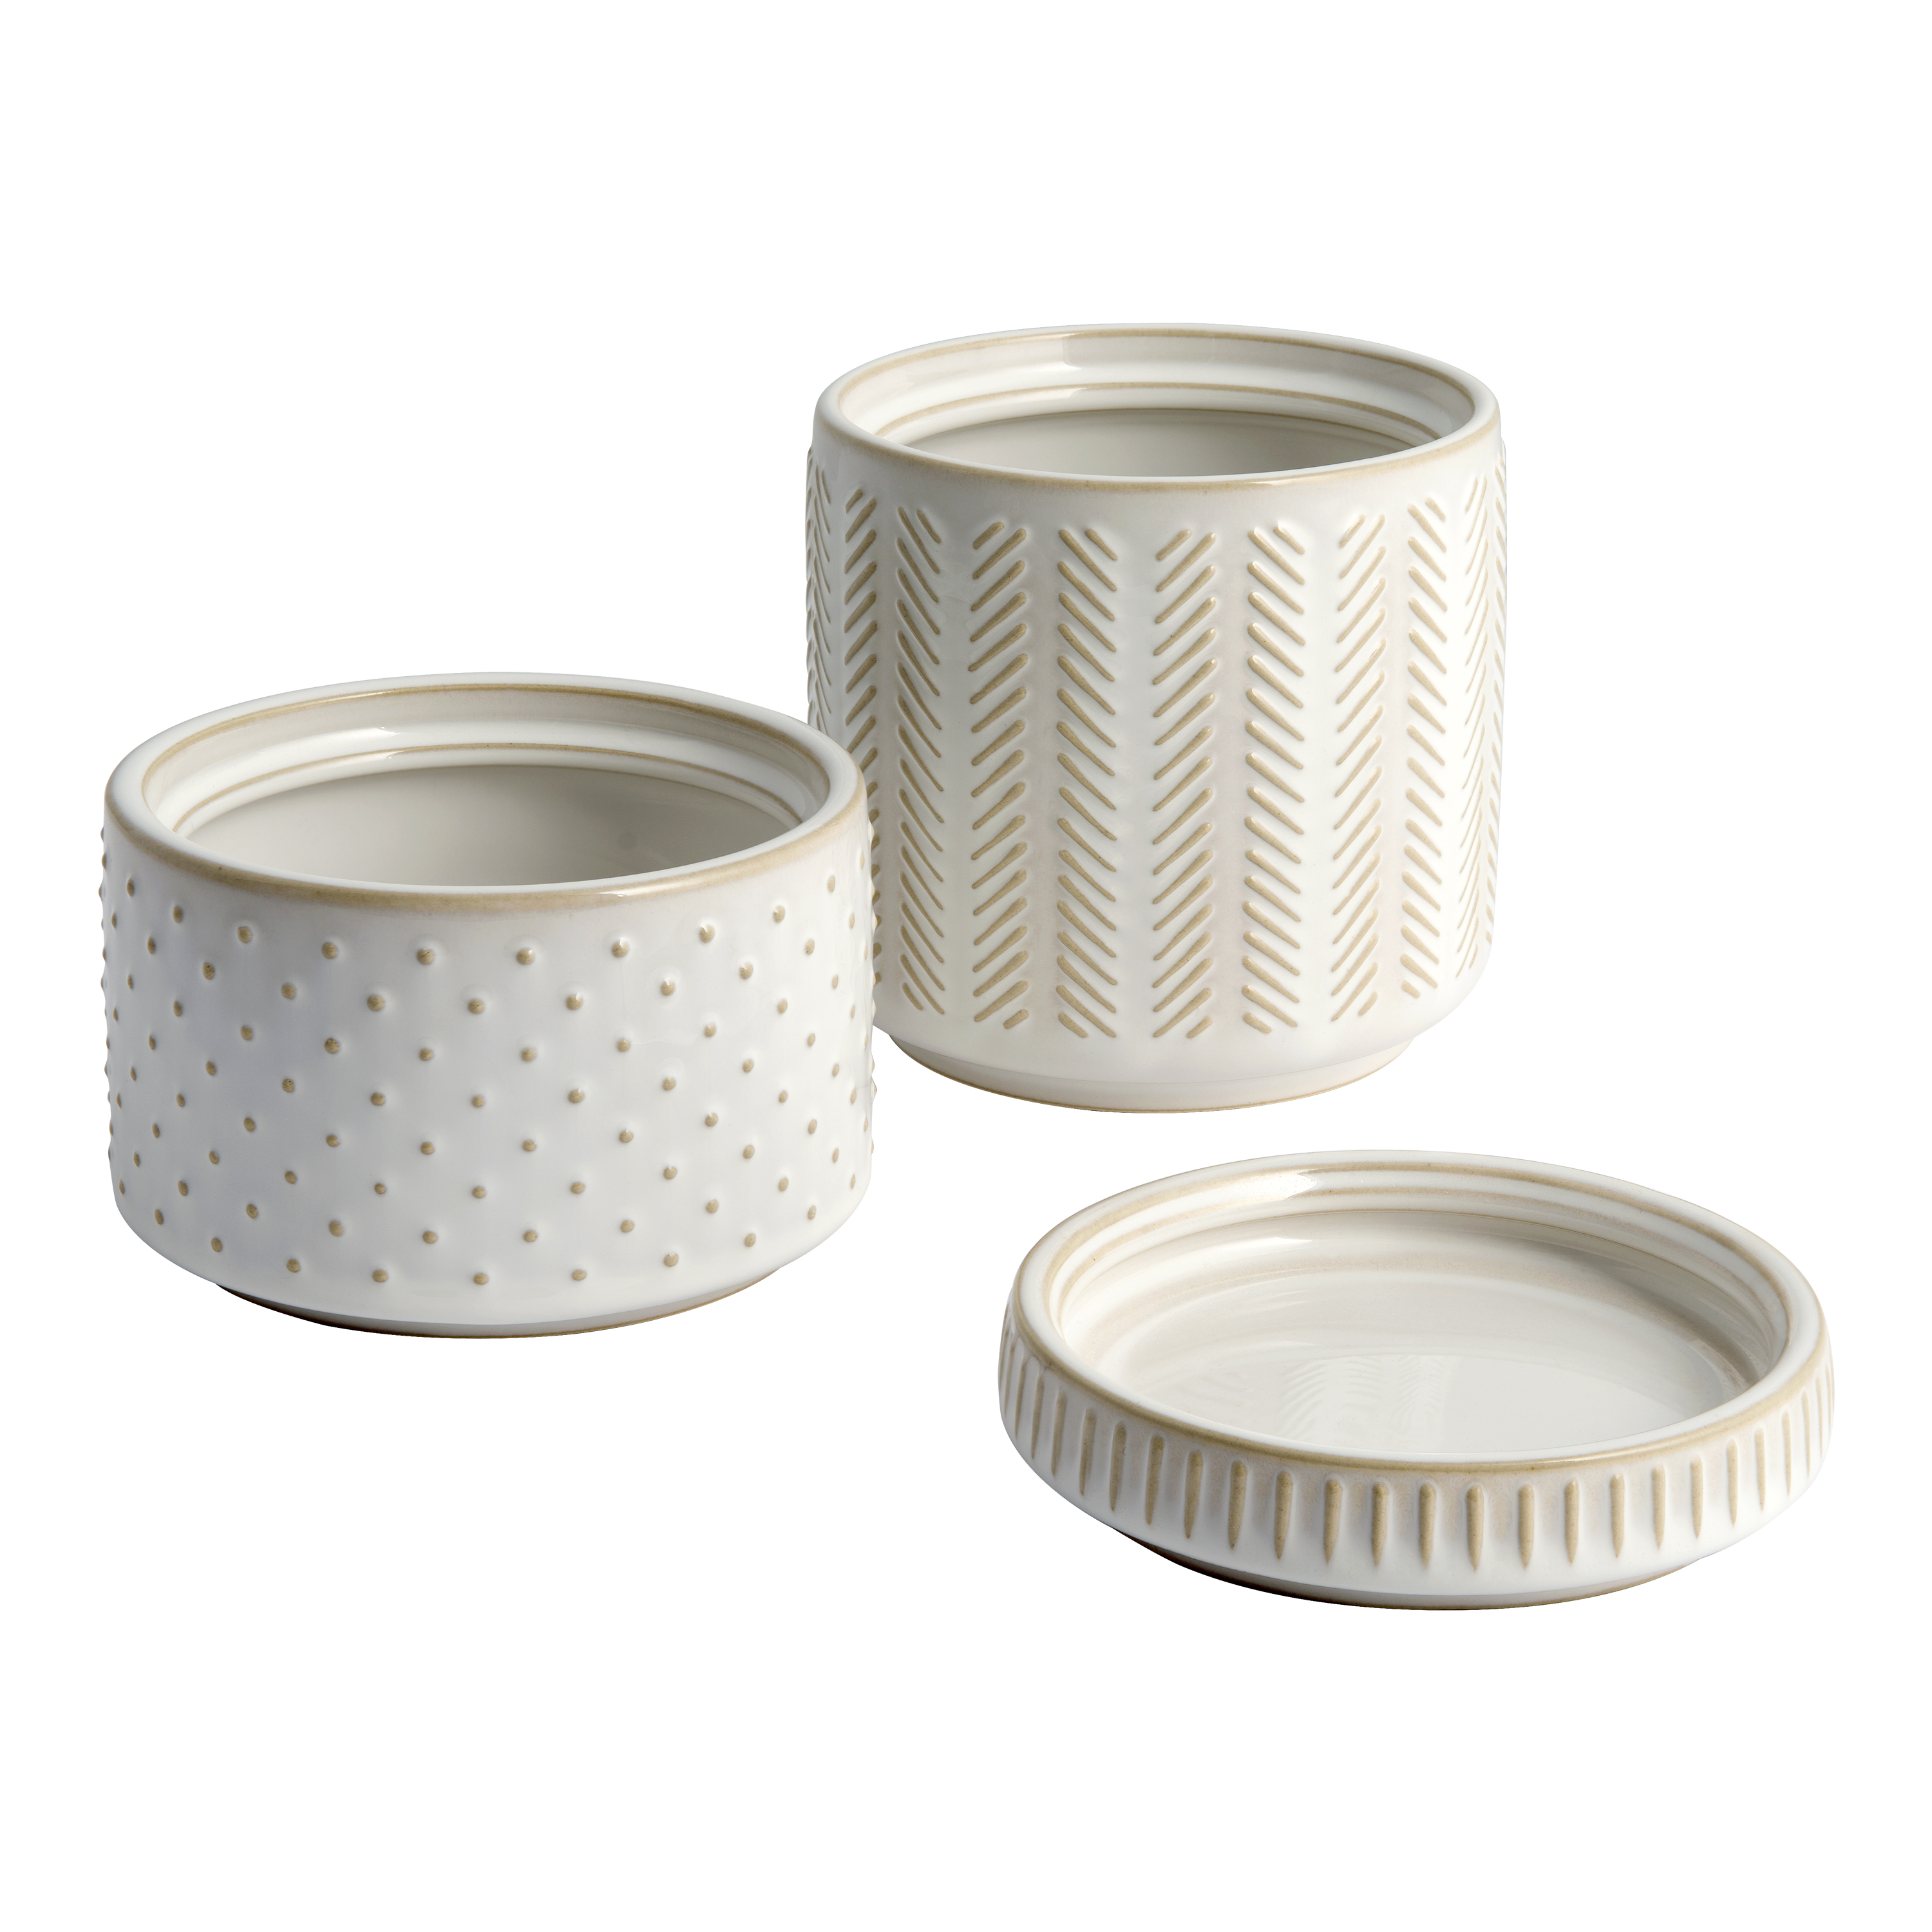 3-Piece Textured Ceramic Stackable Jar Set in Creamy White, Better Homes & Gardens - image 2 of 8